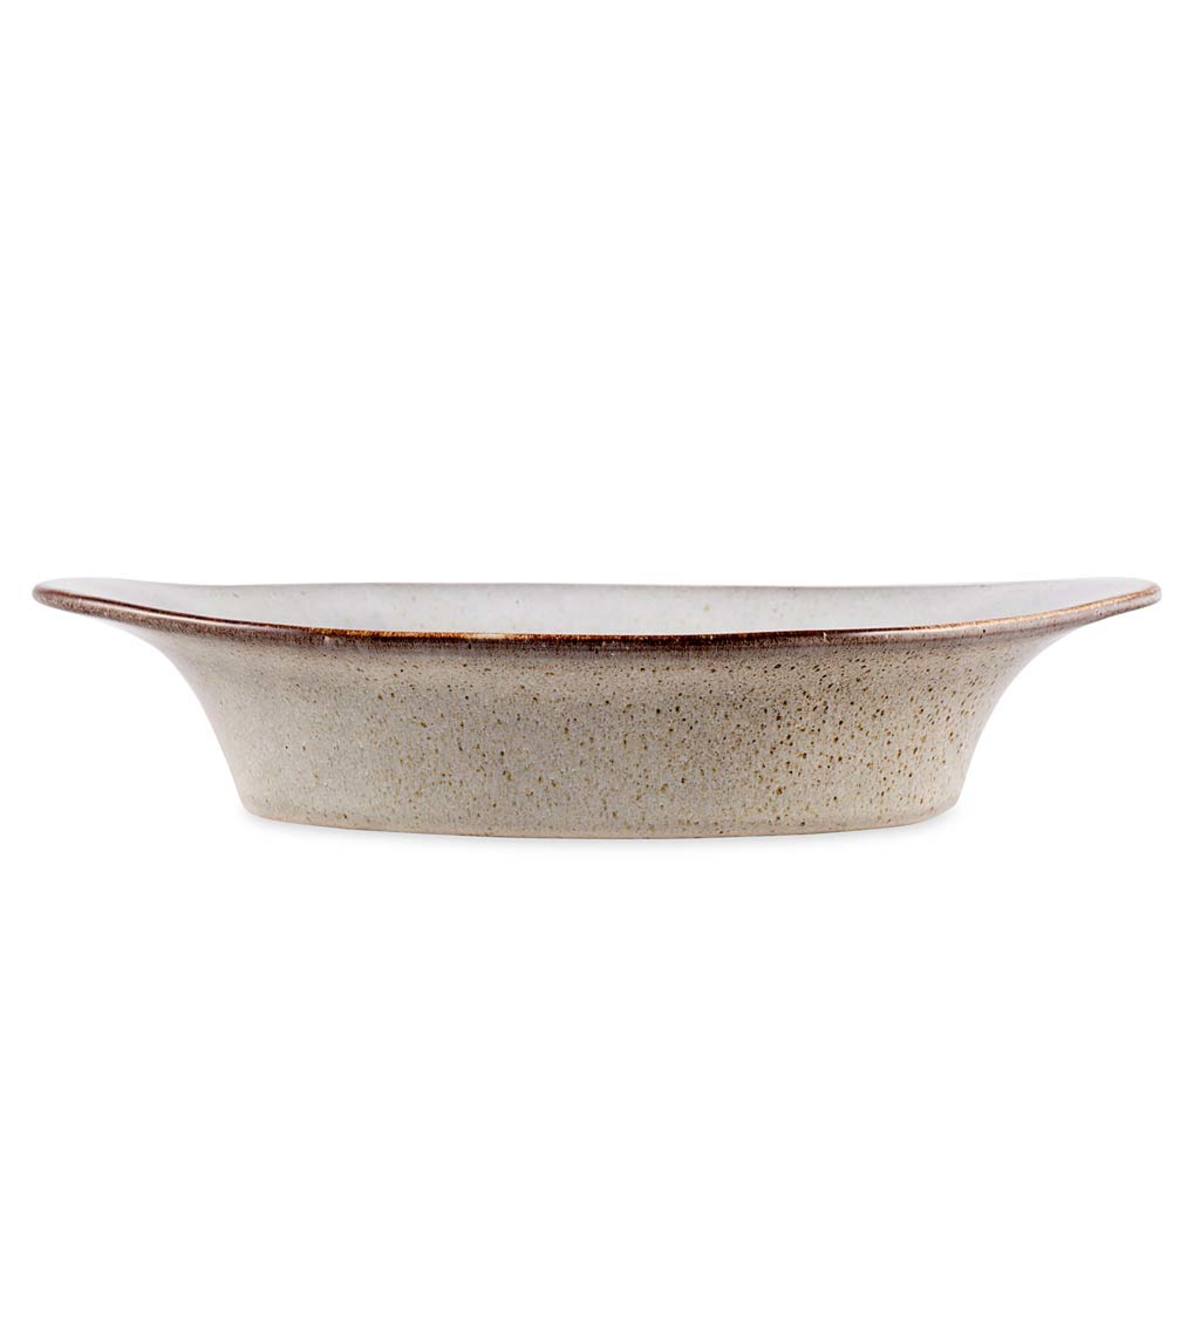 Farmstead Large Oval Stoneware Baker - Bisque